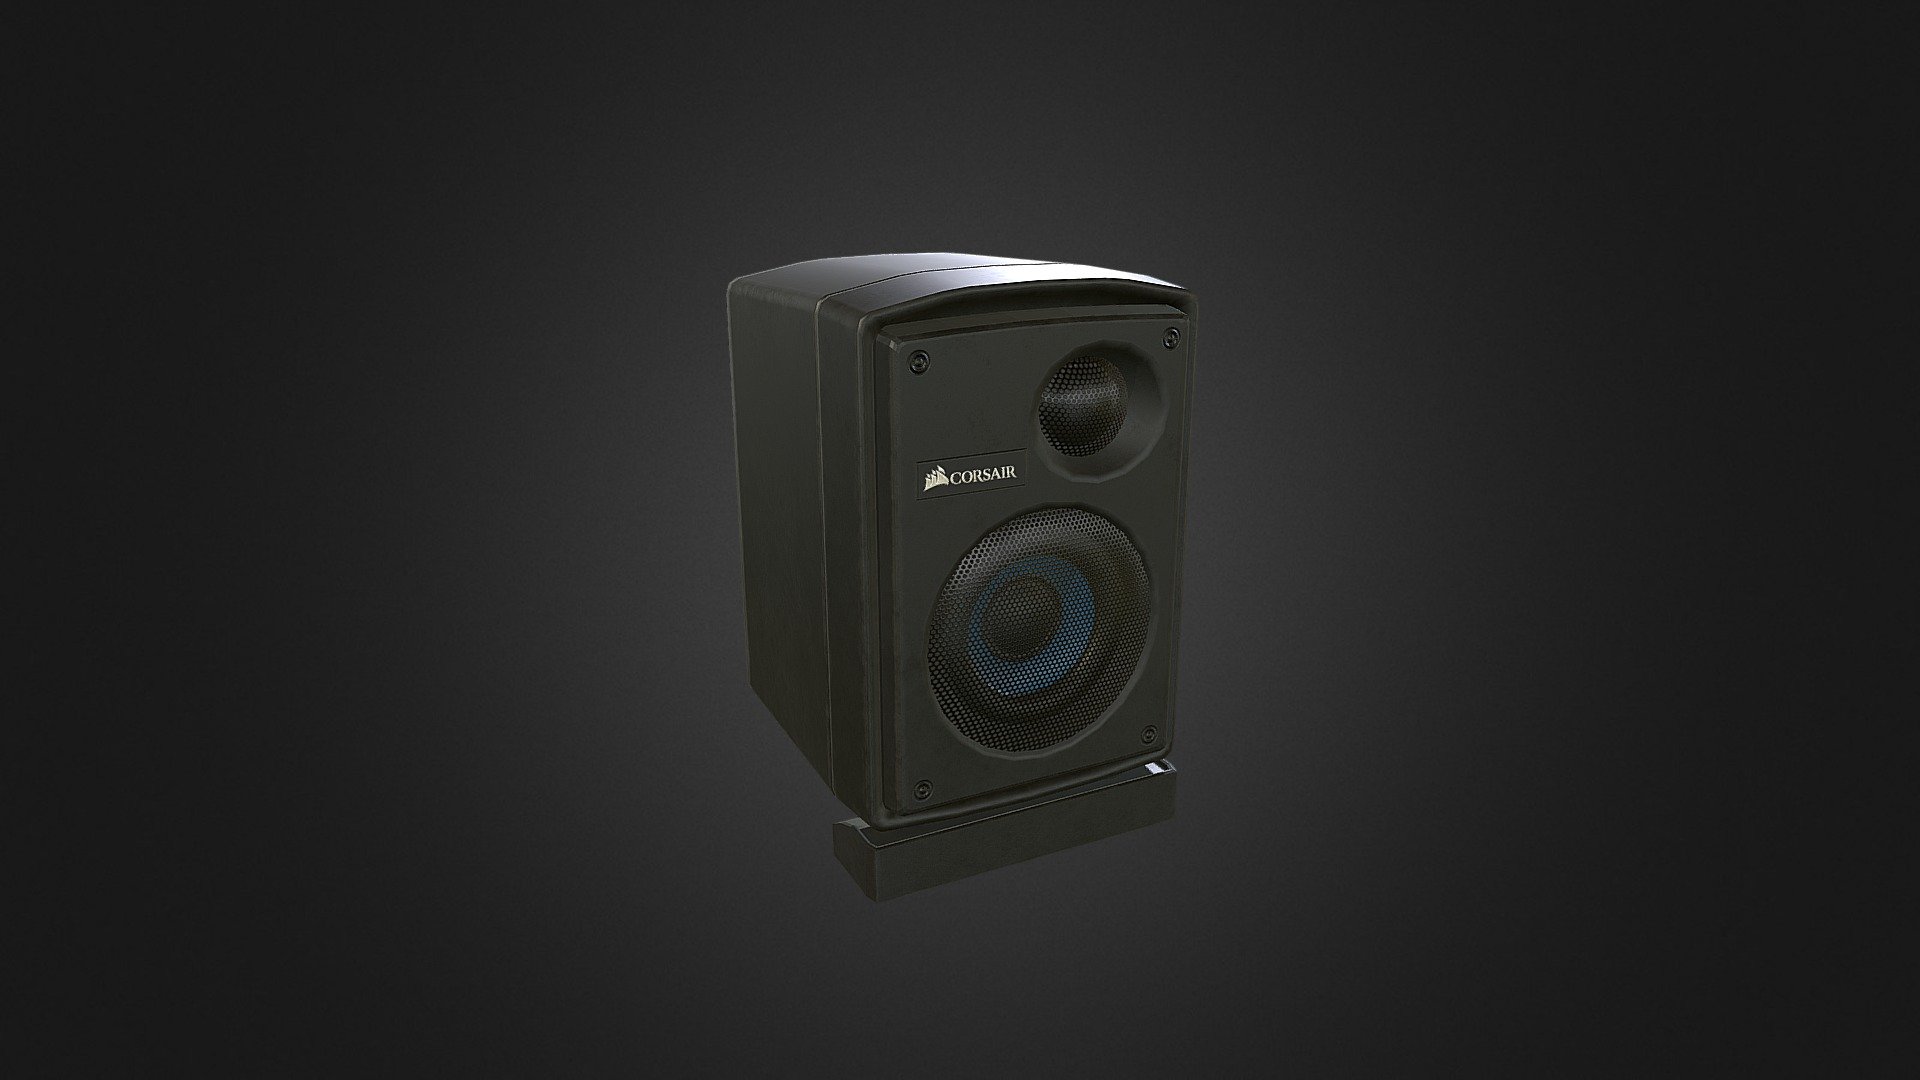 This is the left satellite speaker modelled after Corsairs sp2500 2.1 sound system.

Images can be found here :- http://www.phenakist3d.com/#!sp2500/p2wgi

This was created to be a part of a realistic render of my room that is still in development. My process moved from render engine to unreal engine and will now be using that as my driver for this project.

Previews of my process can be found here :
Cycles Engine :-
https://www.facebook.com/1627441387479013/photos/a.1627609637462188.1073741831.1627441387479013/1703017406588077/?type=3&amp;theater

Unreal Engine :-
https://pbs.twimg.com/media/CeMQ0QJWIAIbCtx.jpg:large - SP2500 Satellite - Buy Royalty Free 3D model by James Blackwell (@JamesBlackwell) 3d model